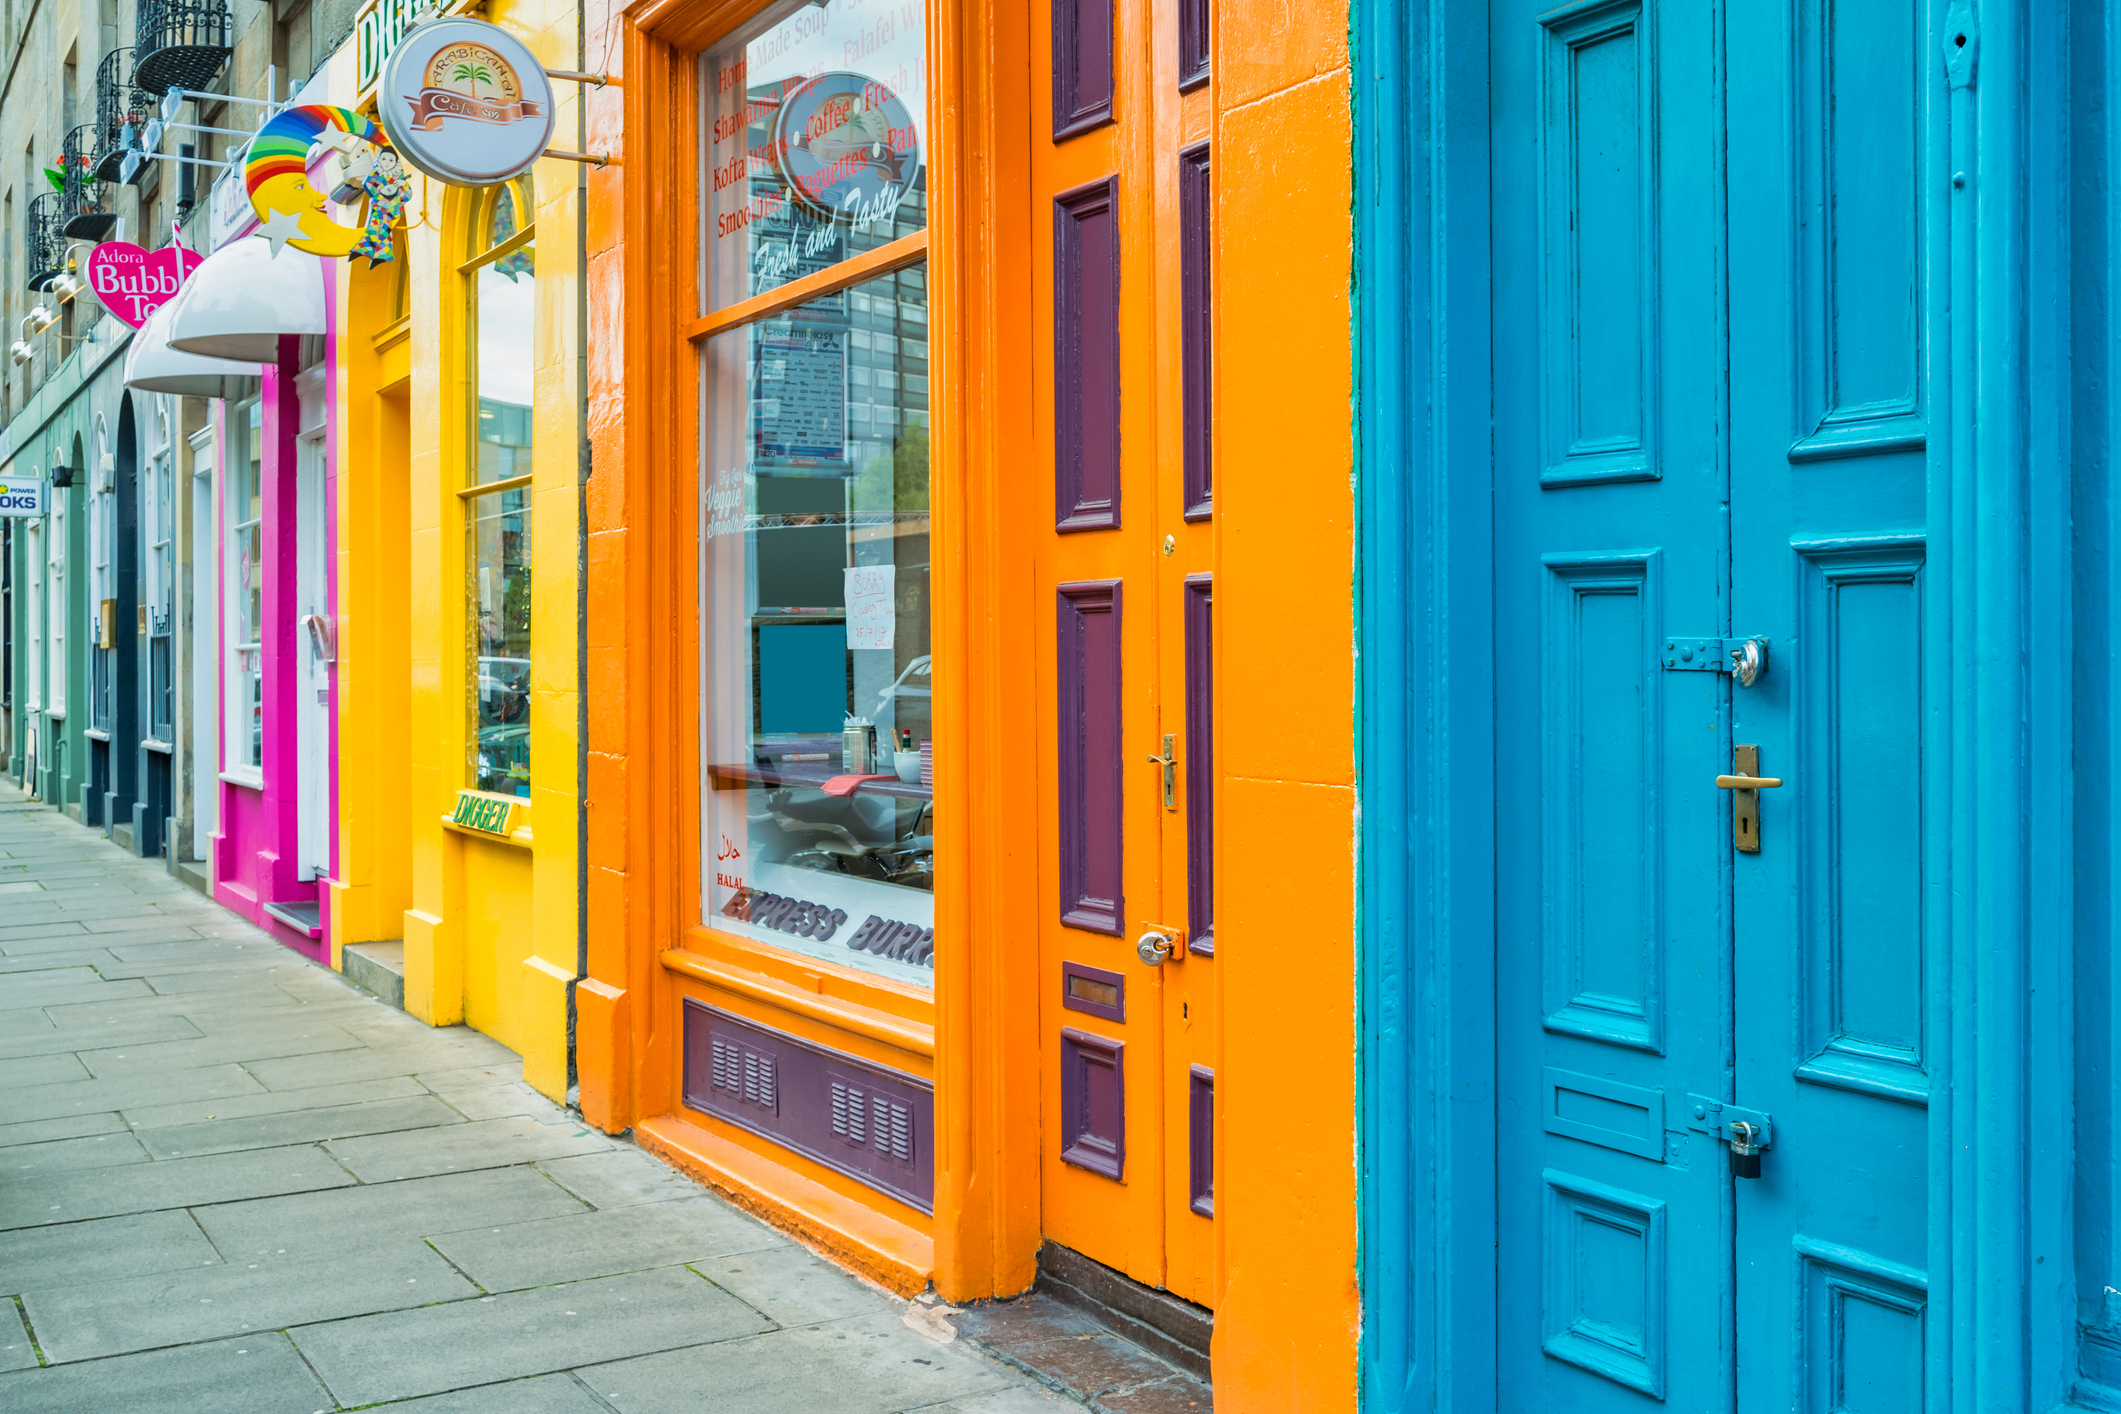 A colourful row of shop fronts in blue, orange and yellow